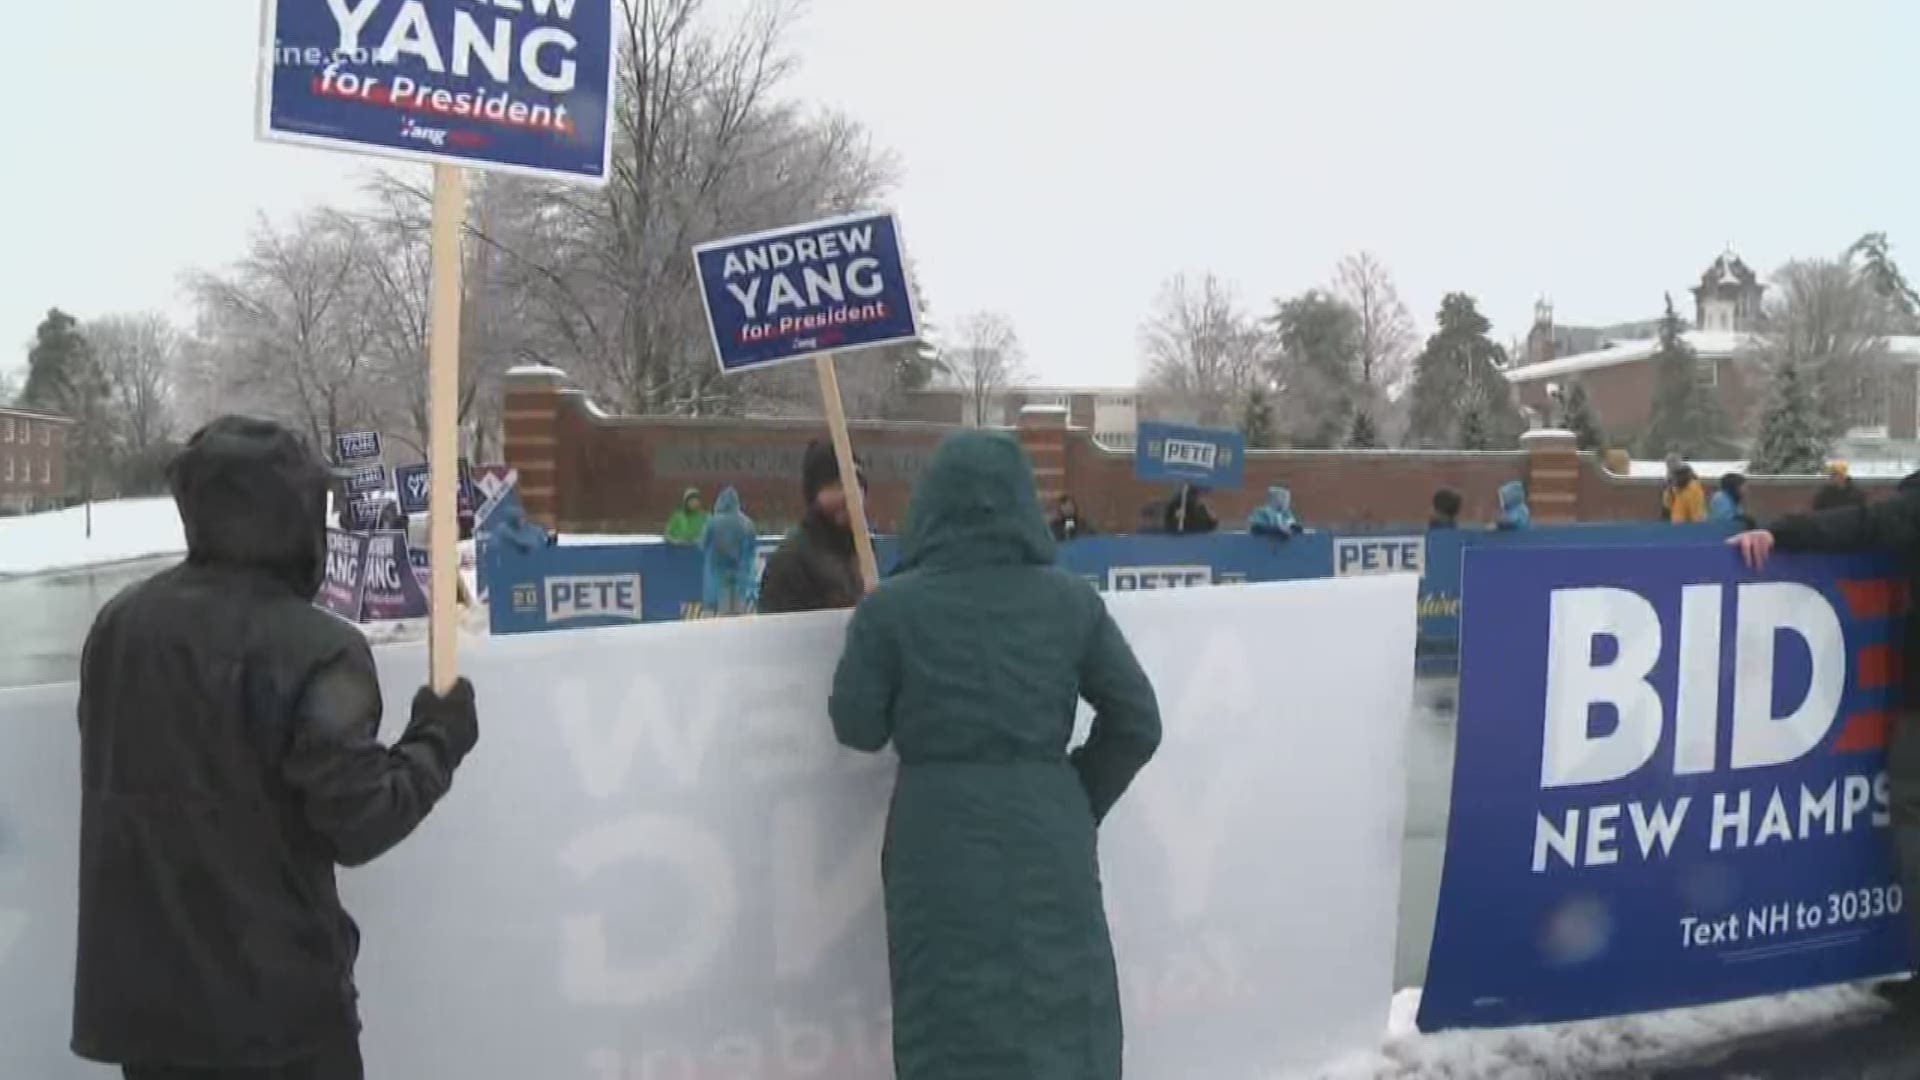 Supporters rally for primary candidates